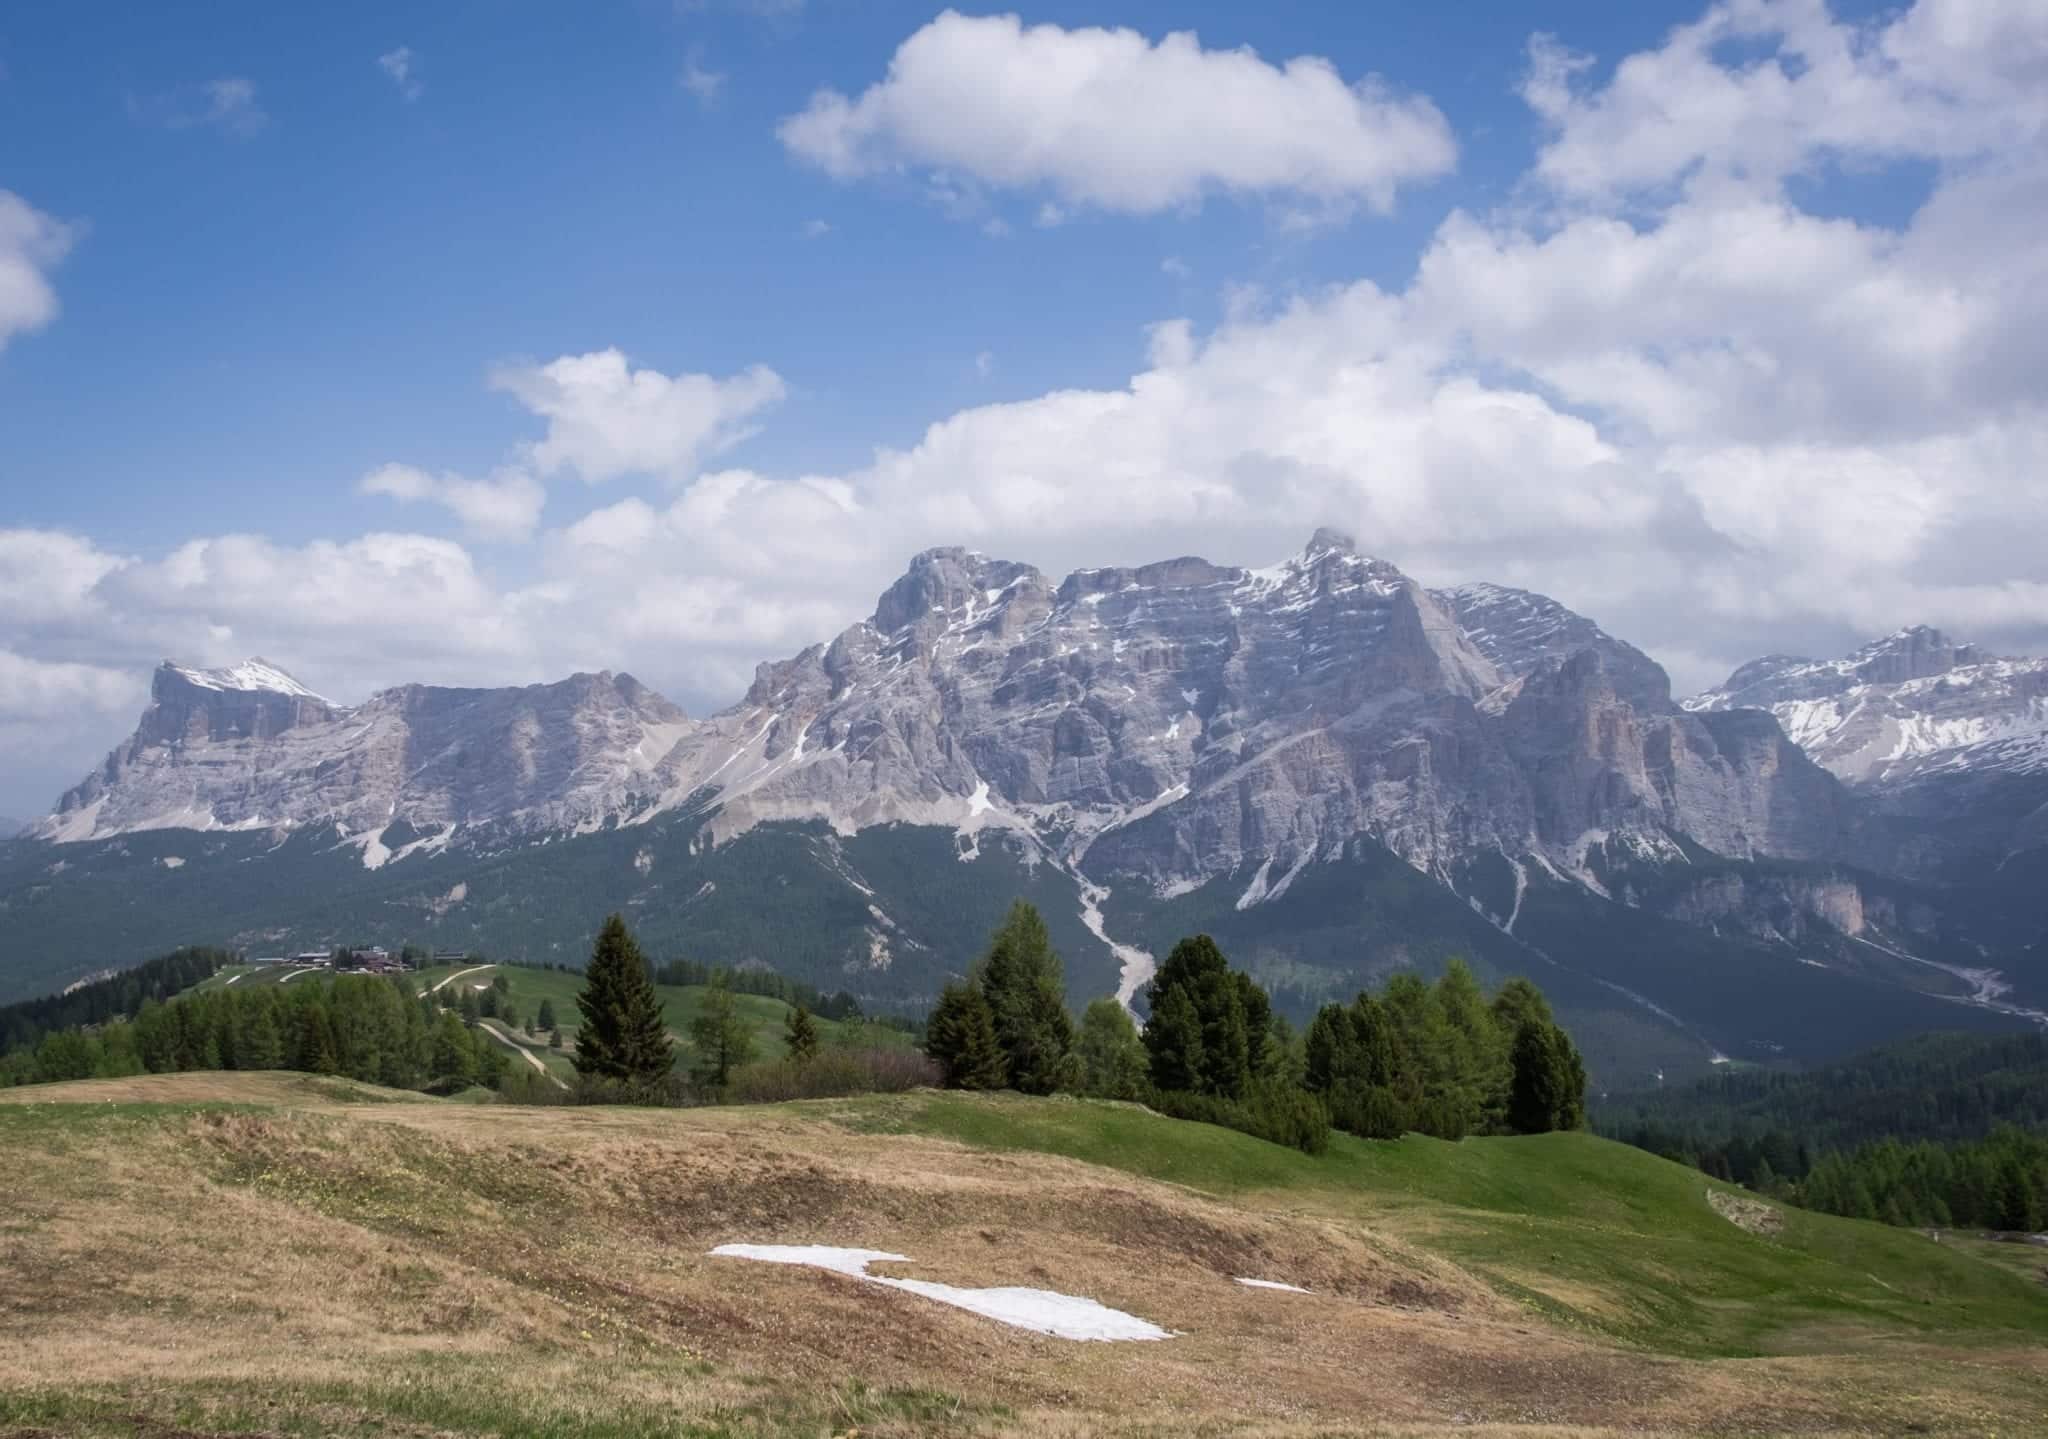 The purple Dolomites in the distances underneath a blue sky with white clouds. In the foreground, green hills and evergreen trees.